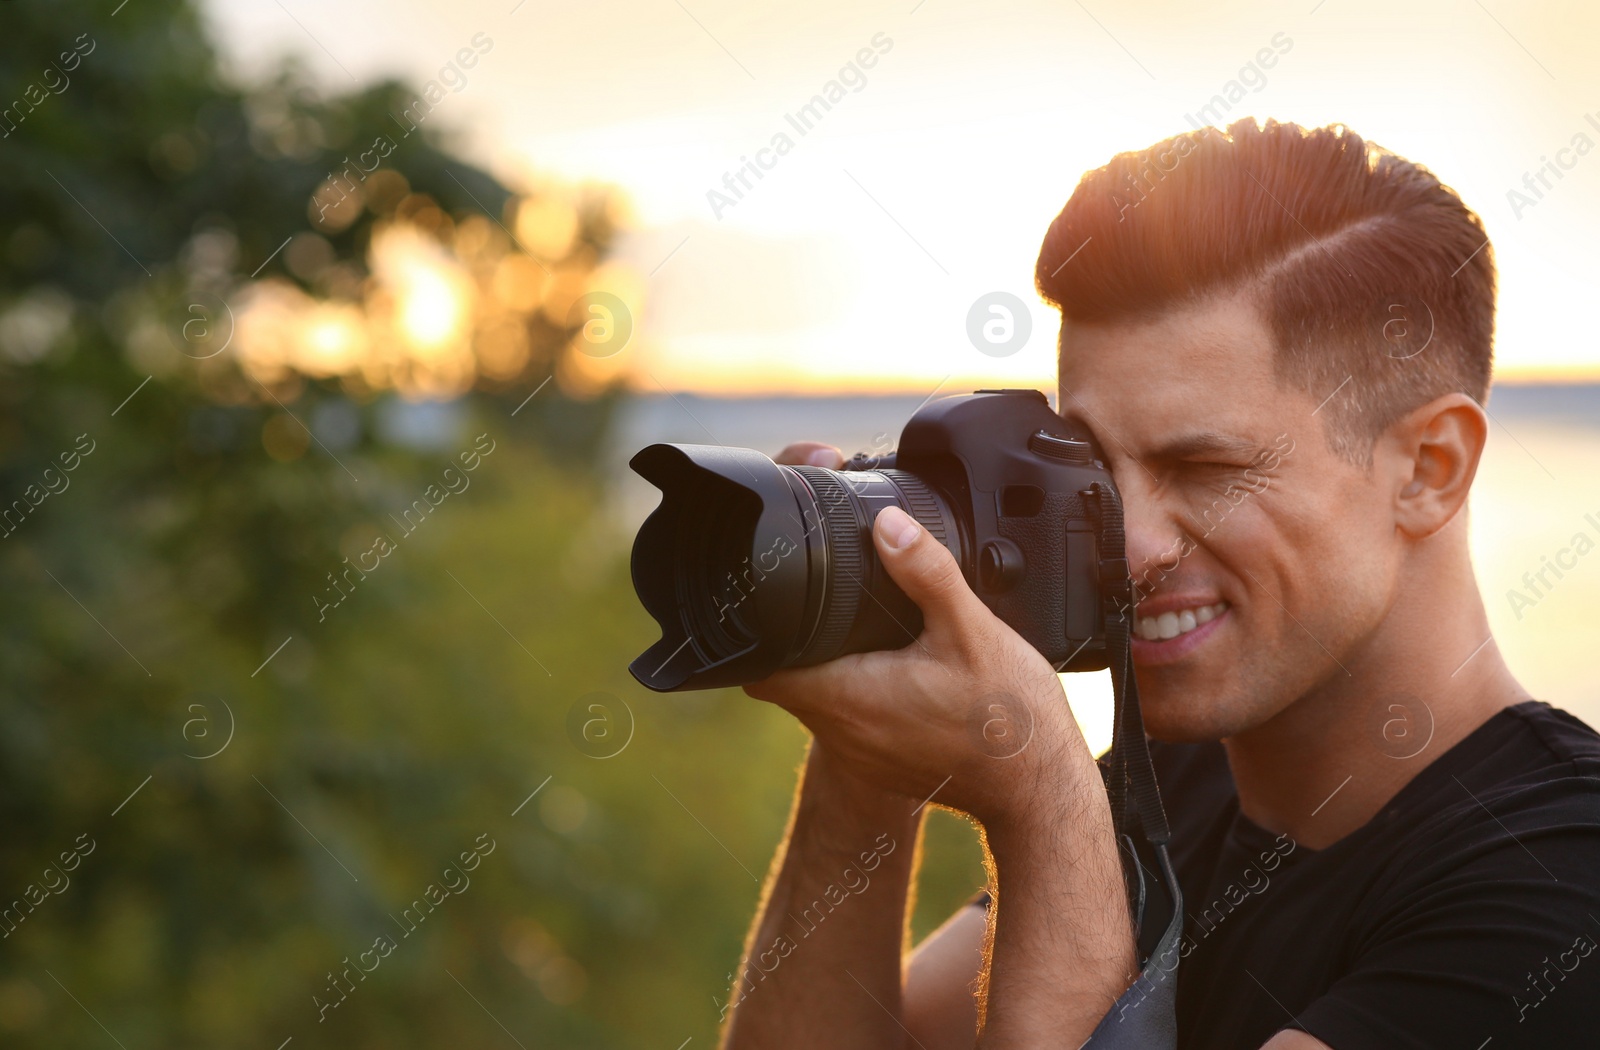 Photo of Photographer taking picture with professional camera in countryside